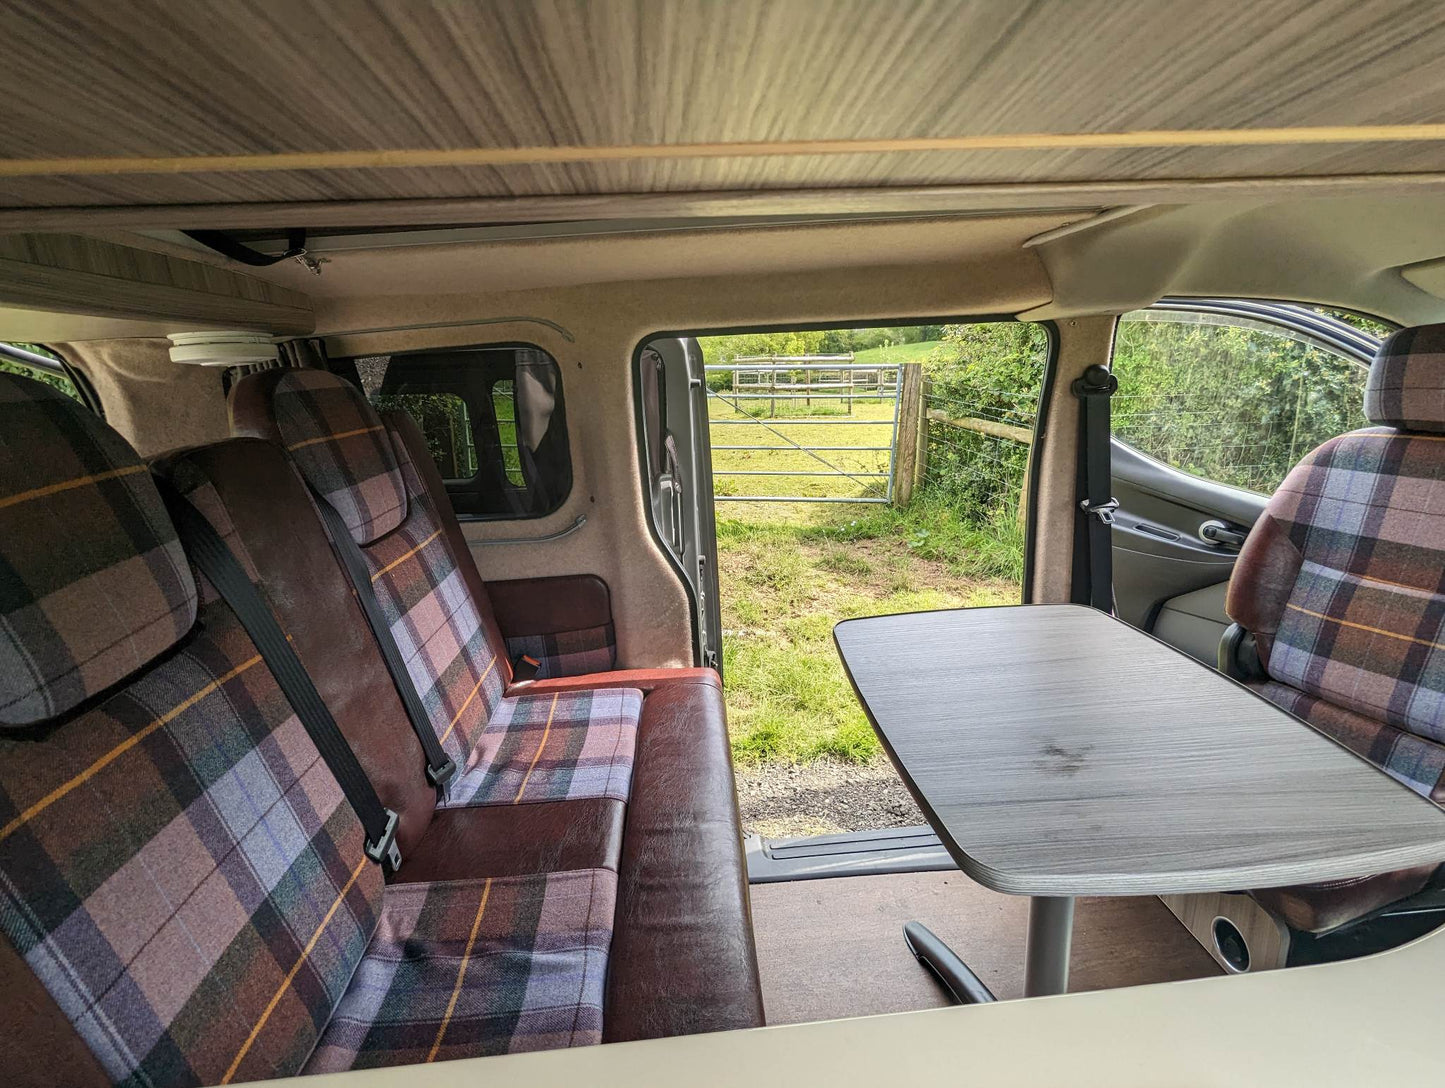 The Hopton Solo or Duo Camper Van Conversion for the Vauxhall Vivaro, Fiat Scudo, Peugeot Expert & Citroen Dispatch Diesel or Electric Camper.